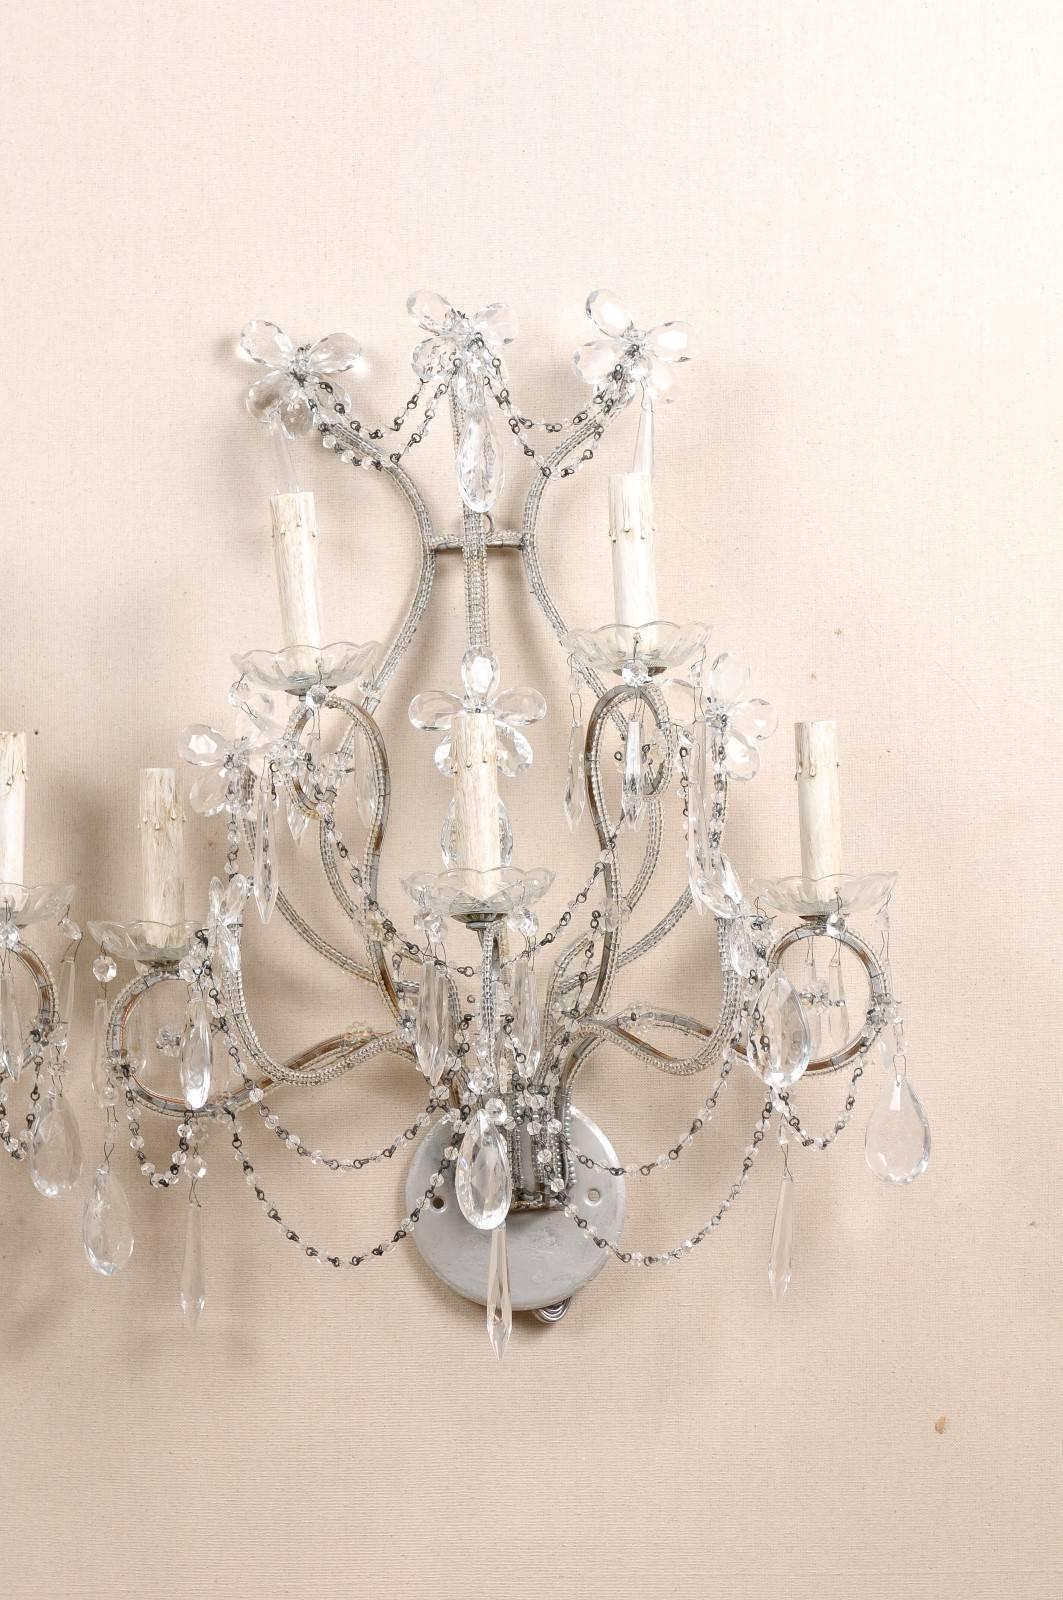 Painted Pair of Crystal Five-Light Sconces from the Mid-20th Century with Flower Motifs